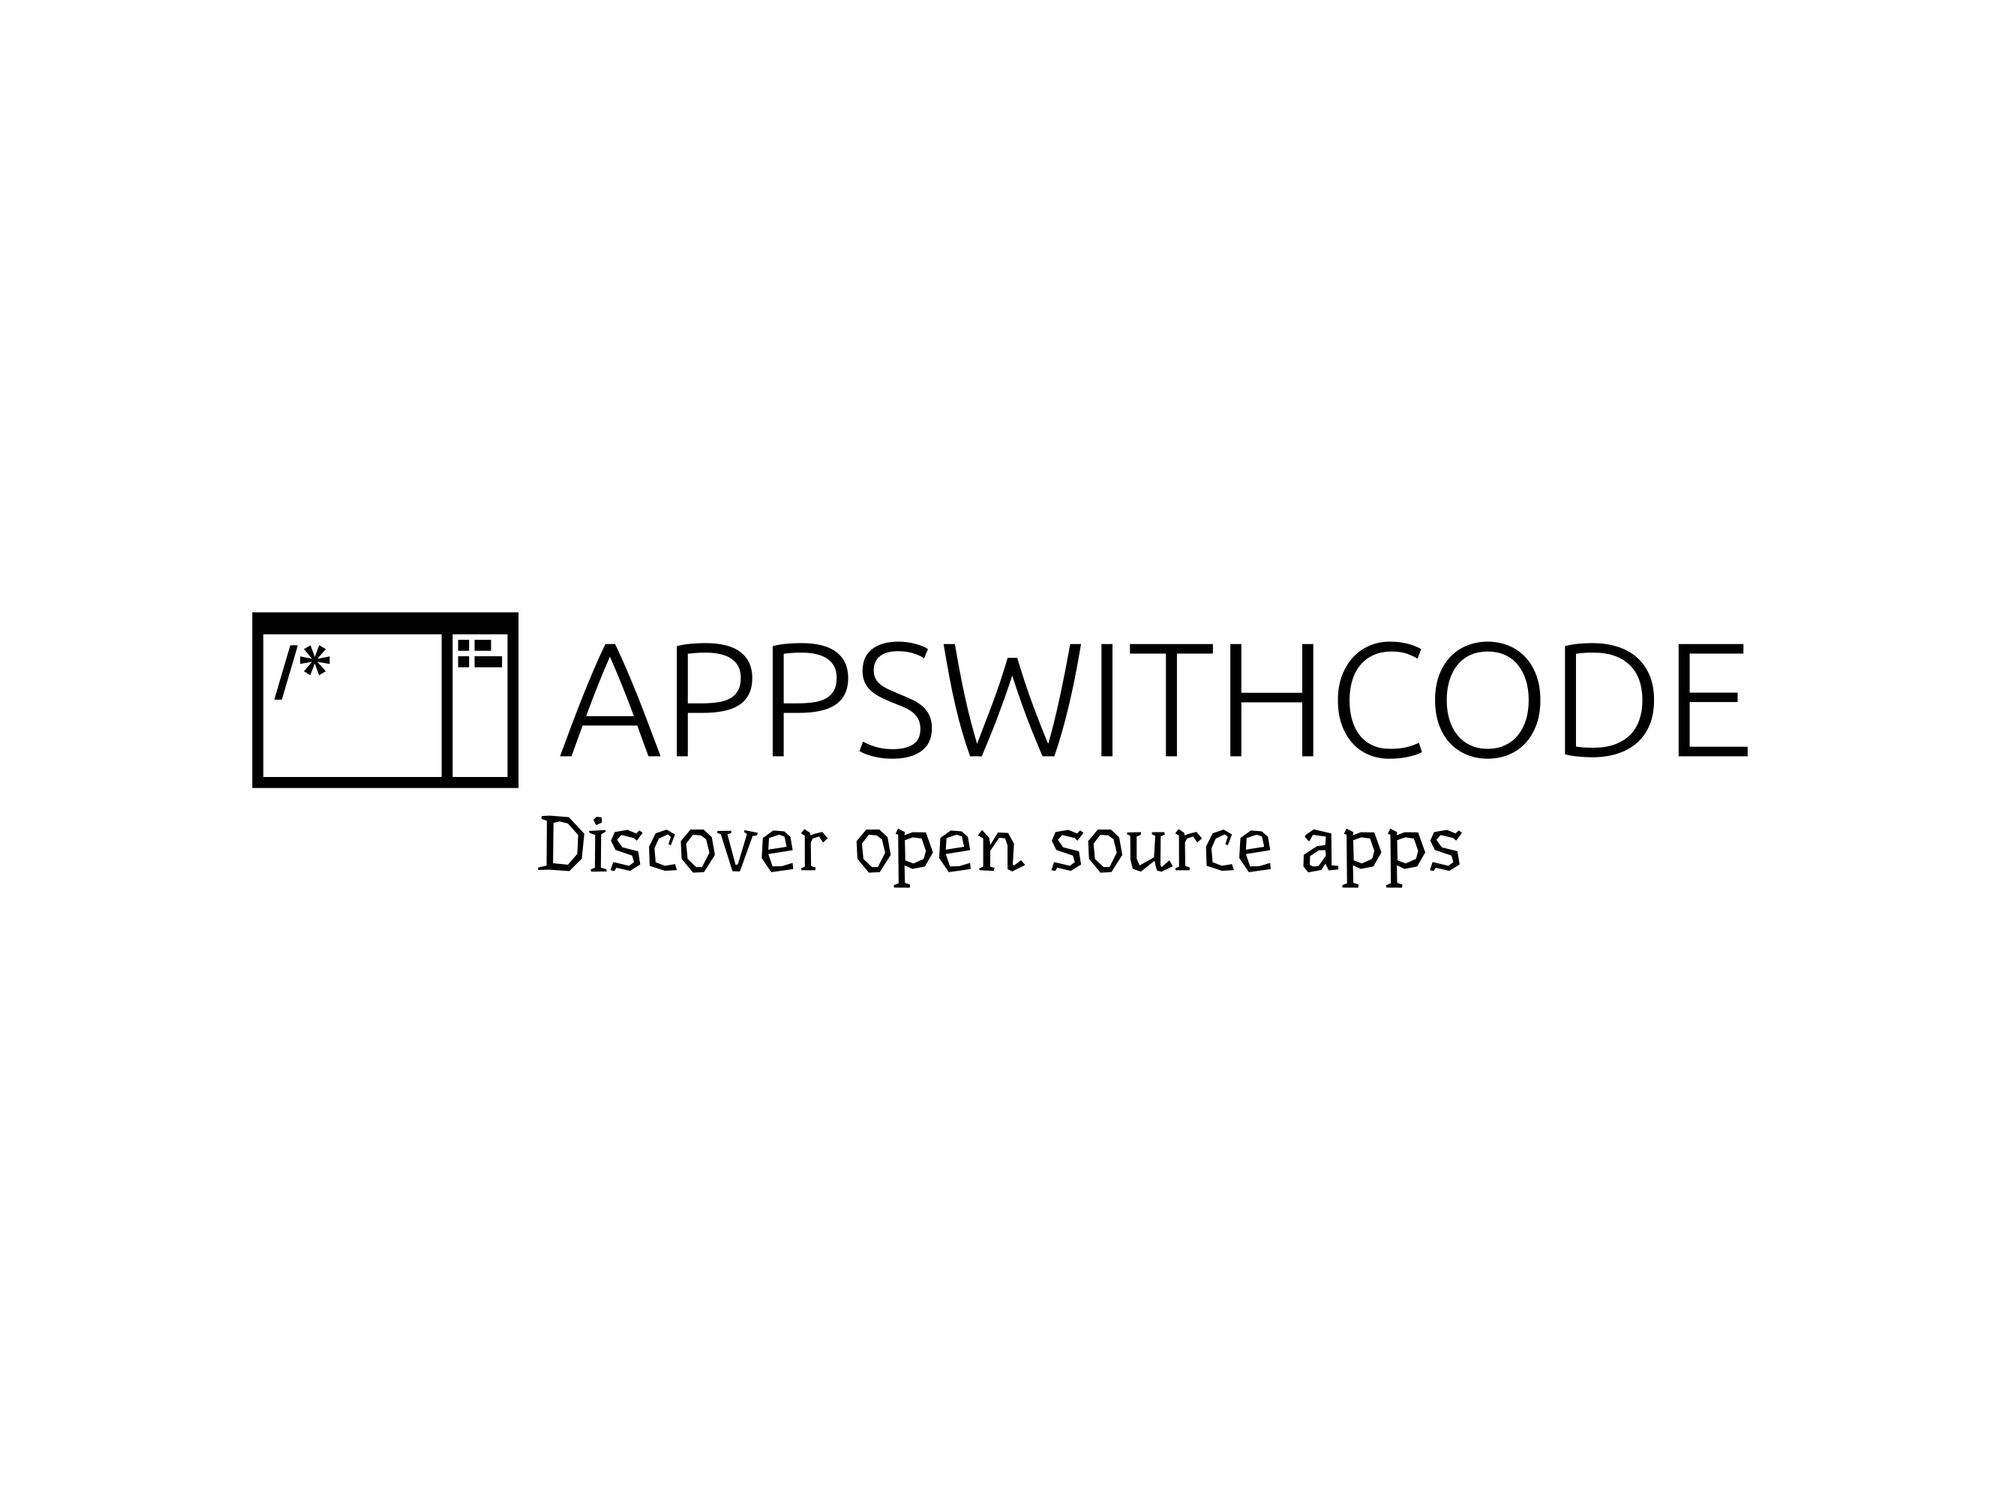 Apps With Code